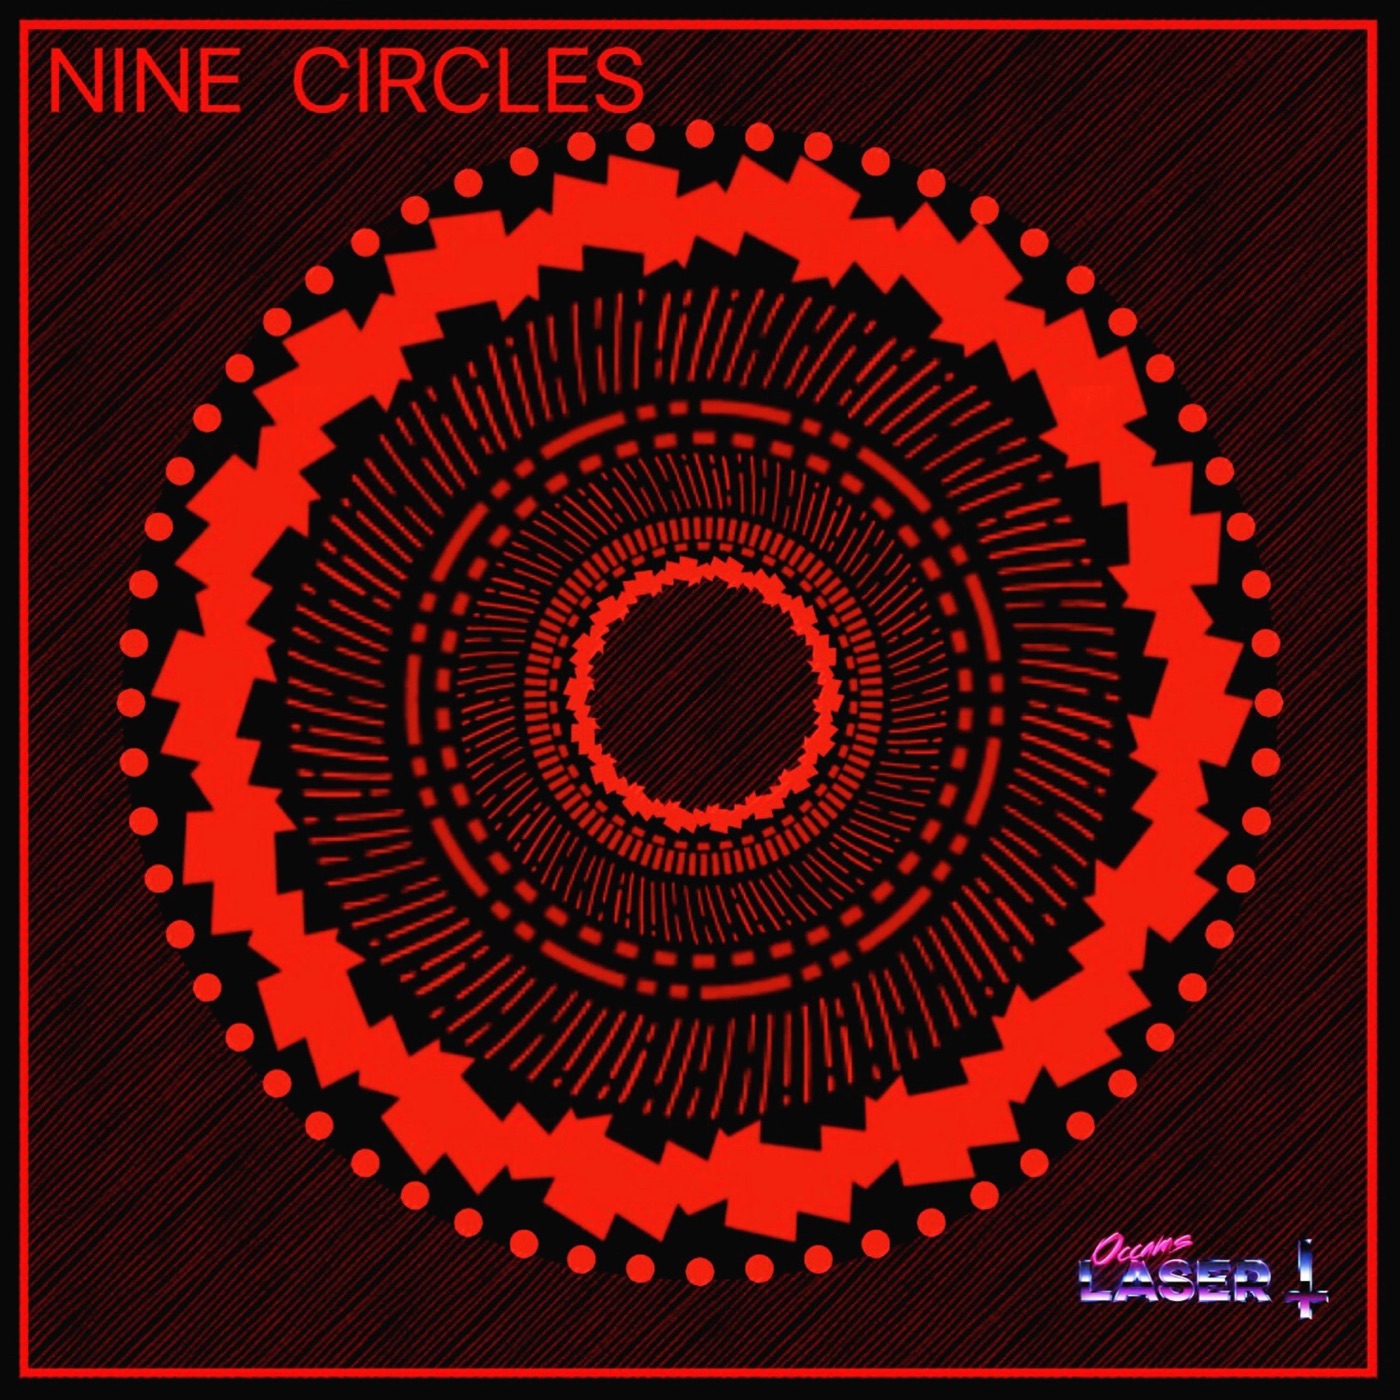 Nine Circles by Occams Laser